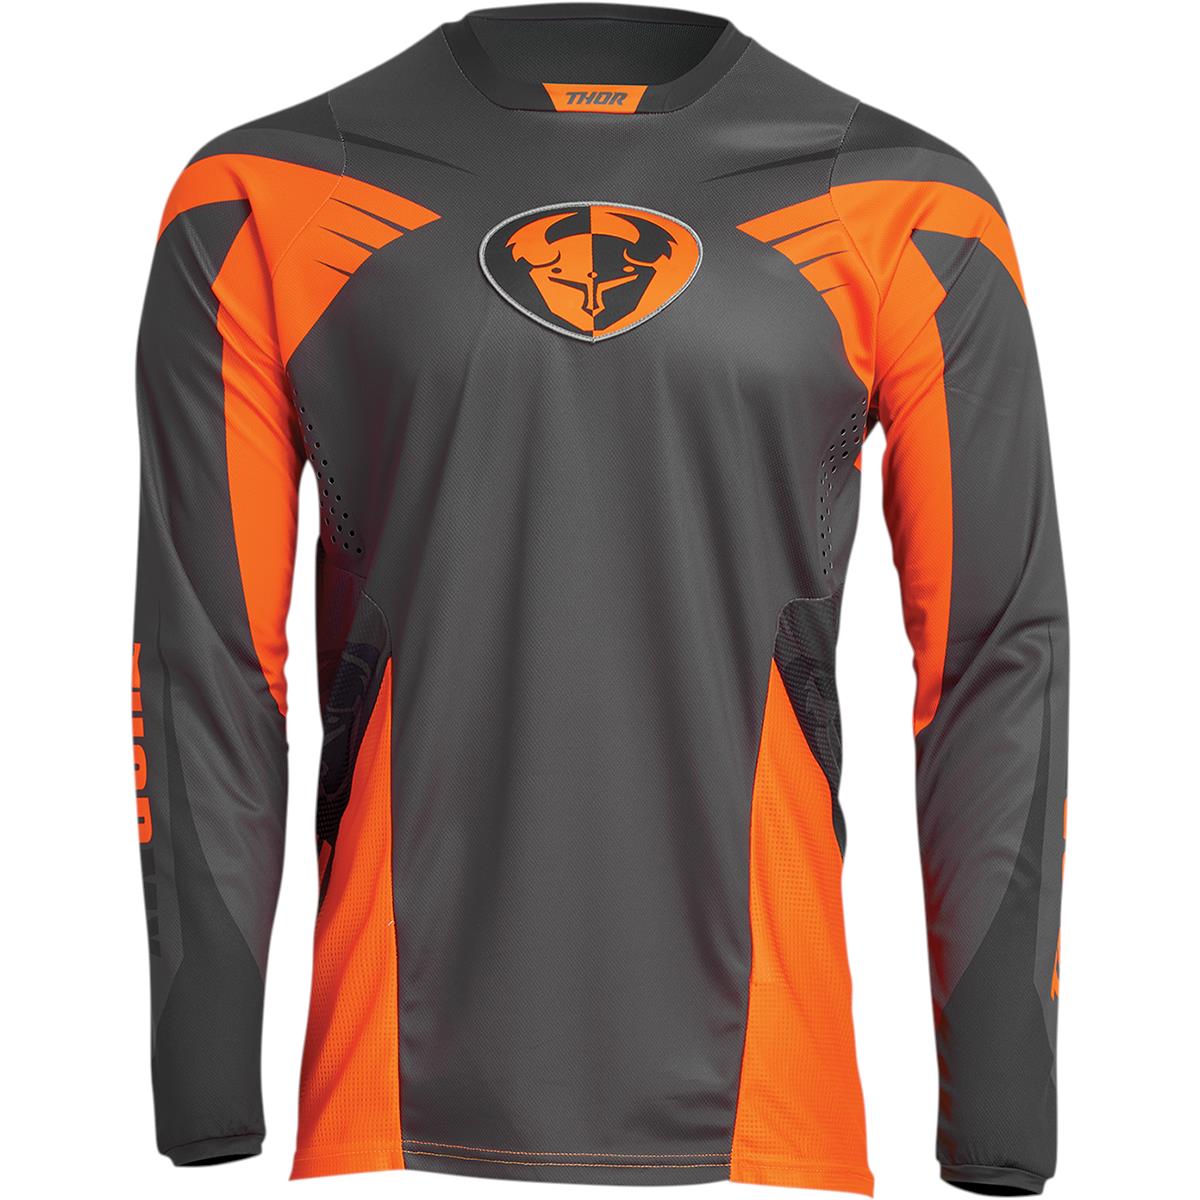 Thor MX Jersey Pulse 04 Limited Edition - Charcoal/Orange